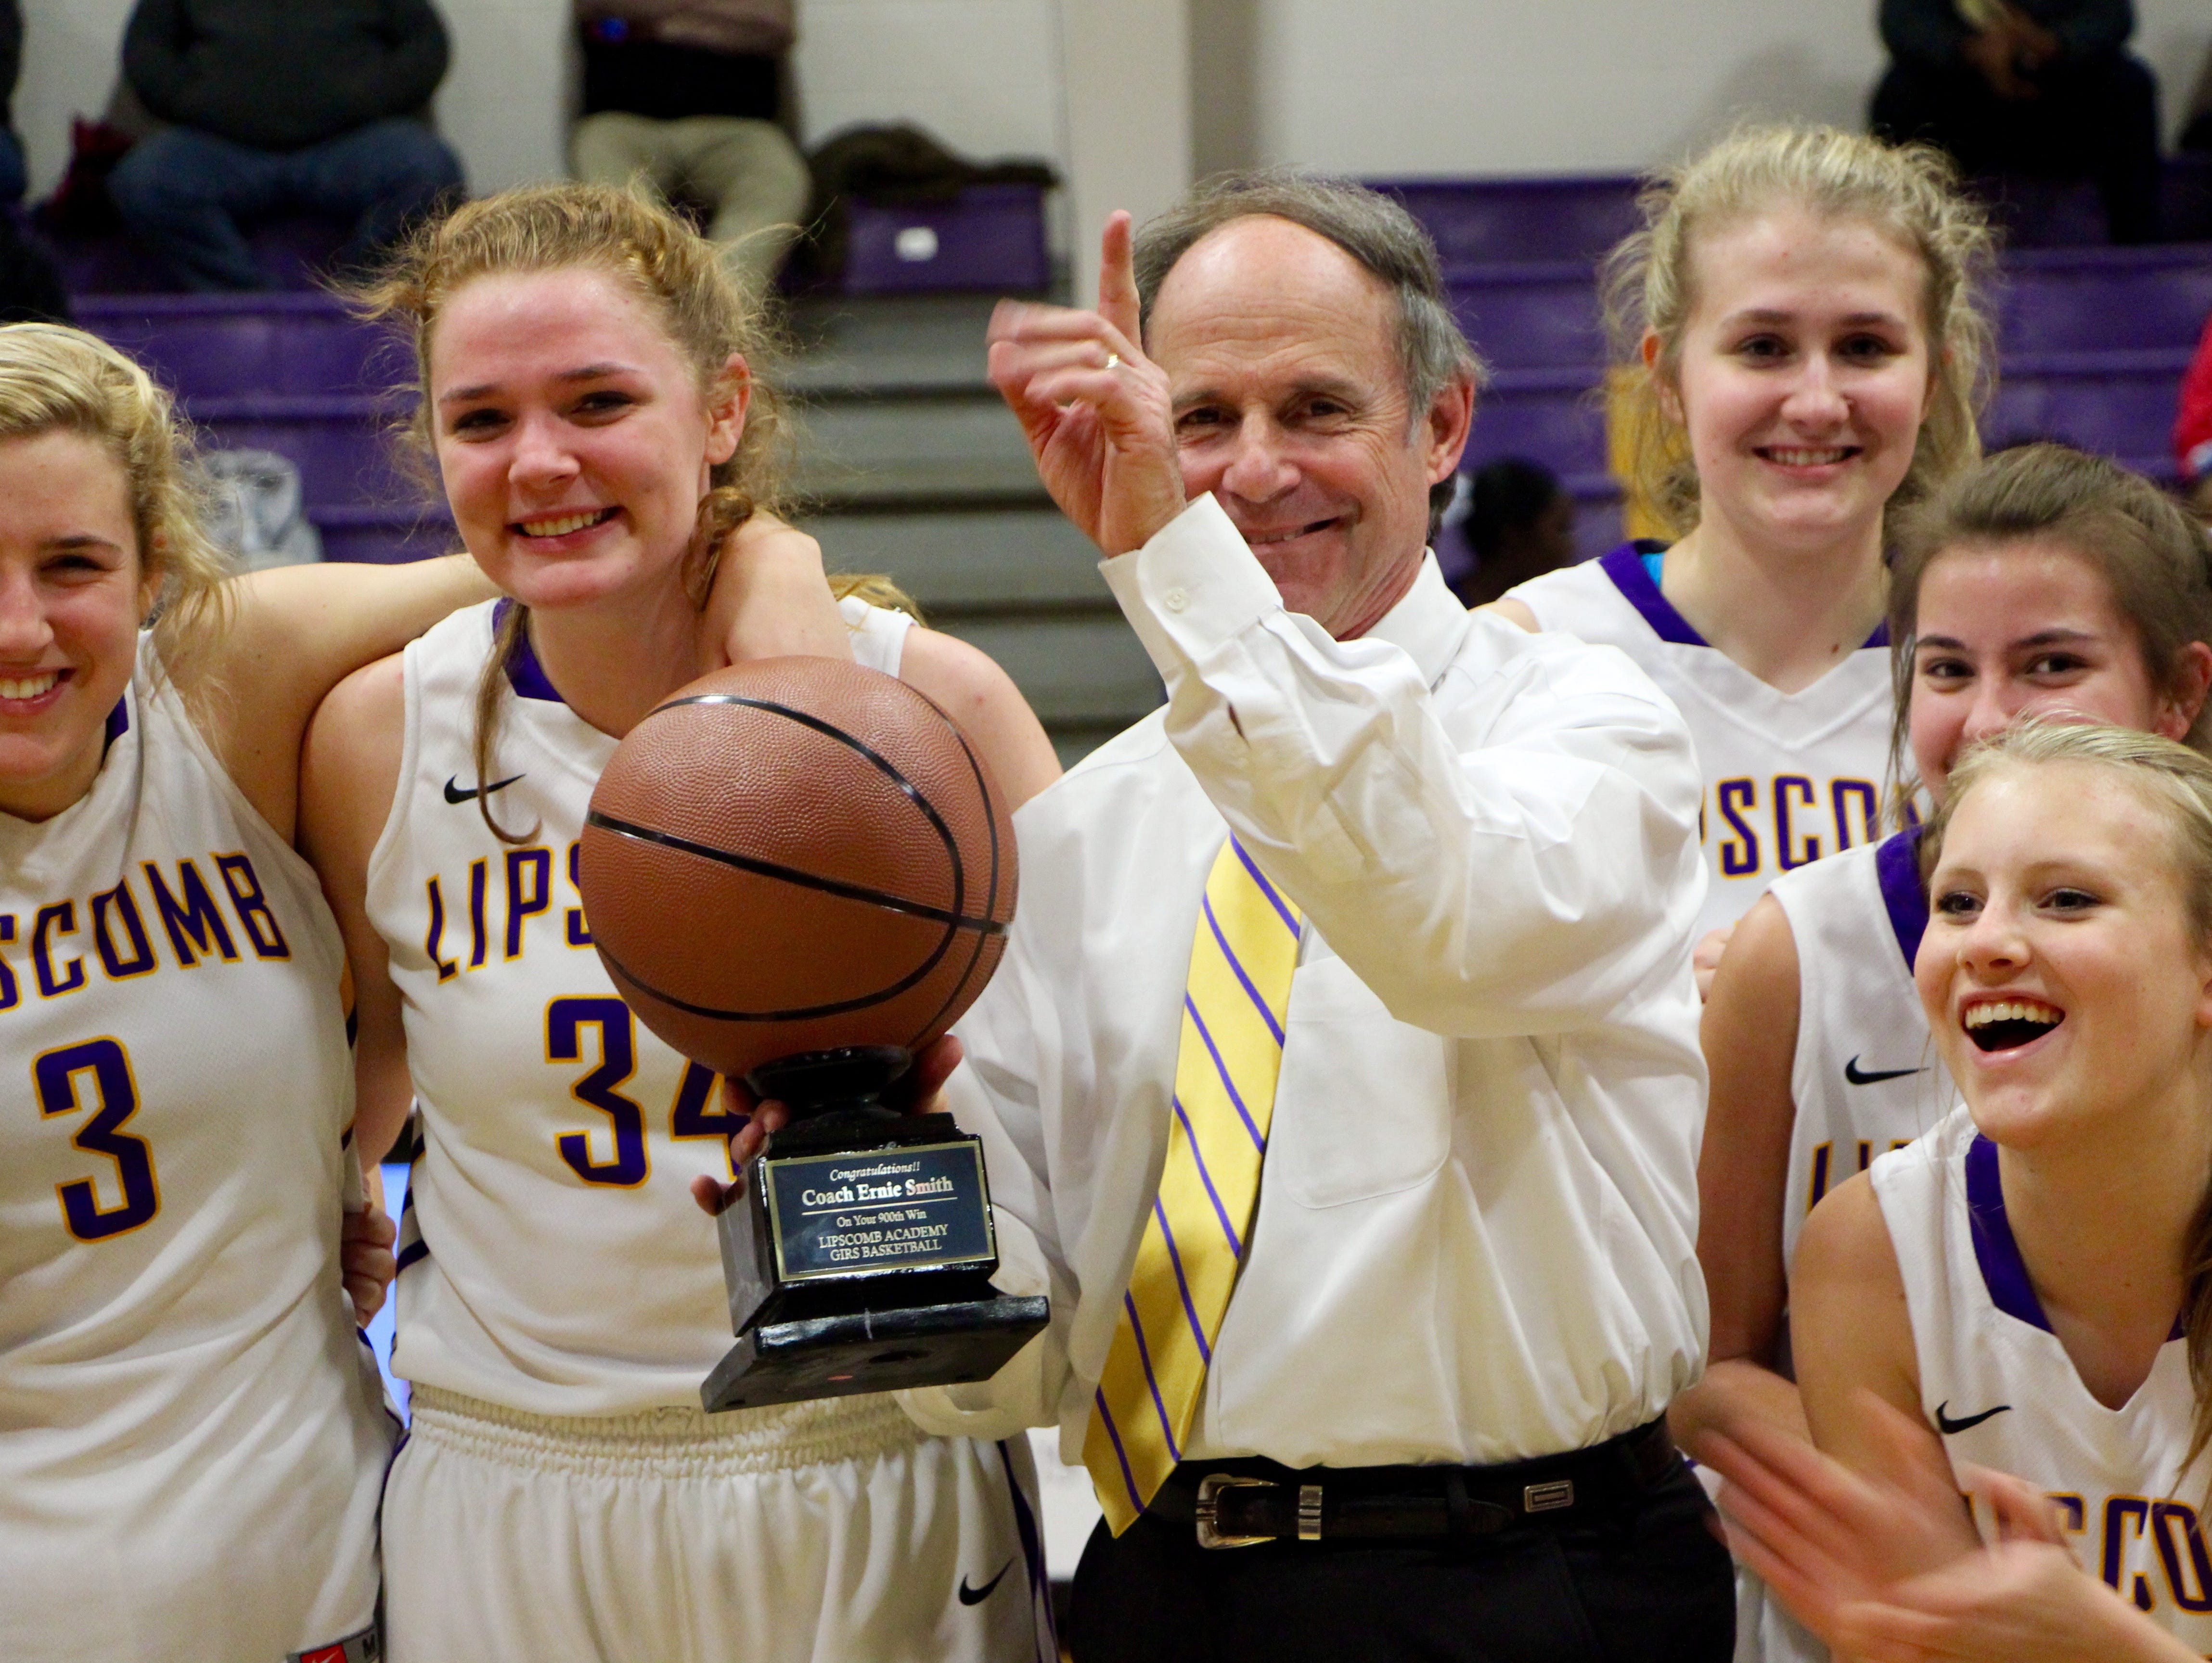 Lipscomb Academy girls basketball coach Ernie Smith celebrates with players following a 51-28 win over Martin Luther King Magnet School Tuesday, earning Smith his 900th basketball coaching victory.